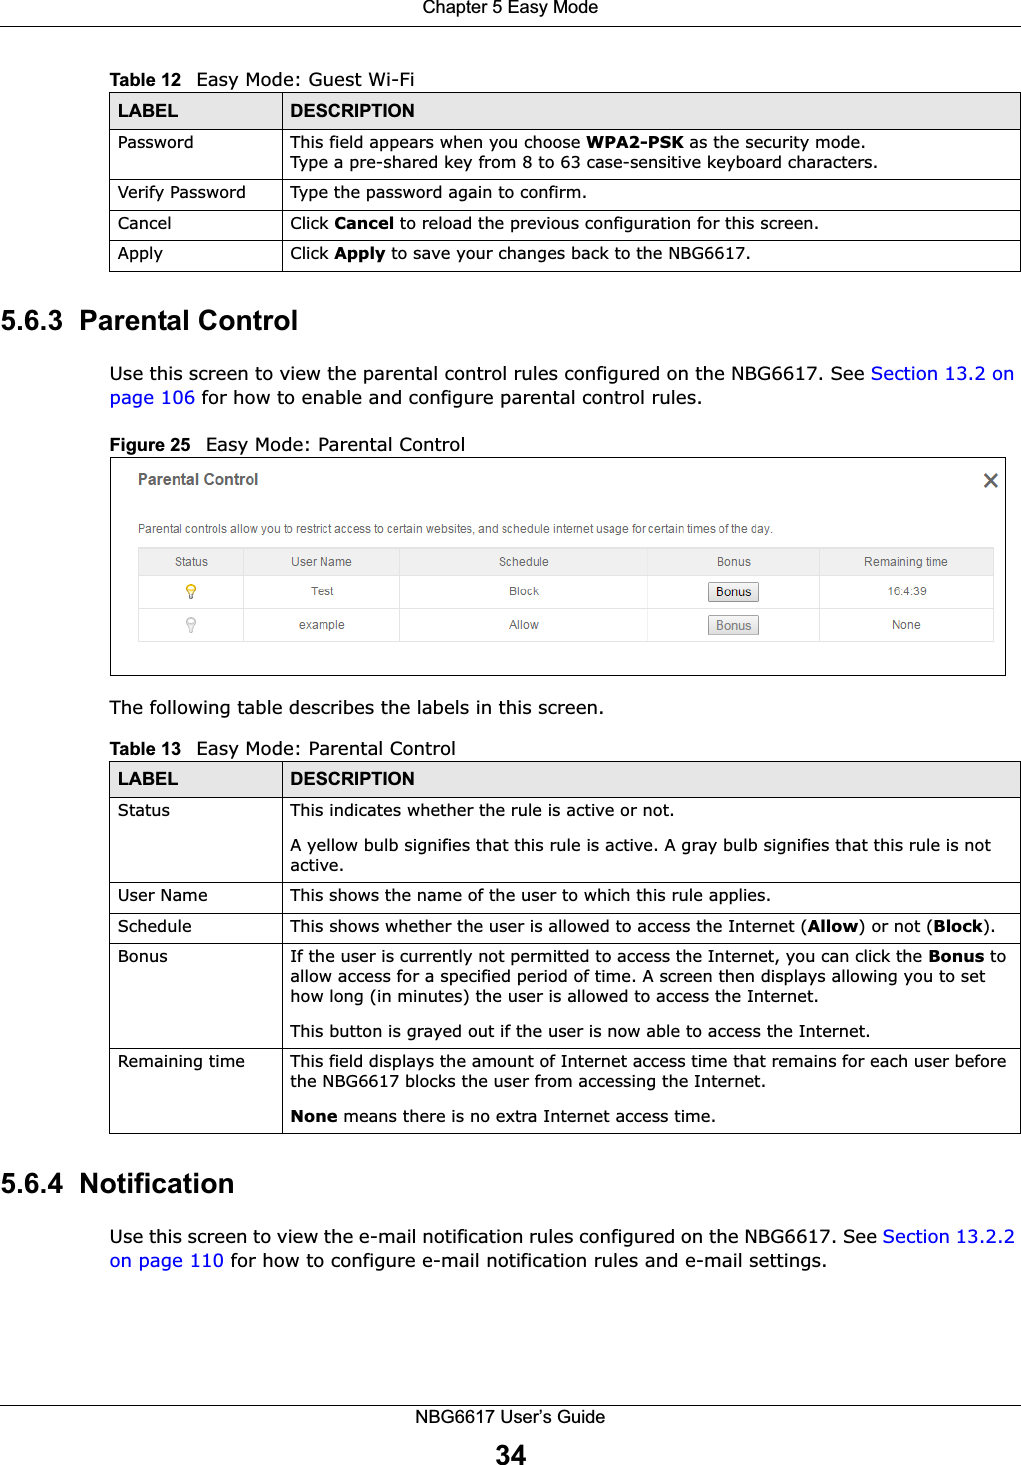 Chapter 5 Easy ModeNBG6617 User’s Guide345.6.3  Parental ControlUse this screen to view the parental control rules configured on the NBG6617. See Section 13.2 on page 106 for how to enable and configure parental control rules.Figure 25   Easy Mode: Parental Control The following table describes the labels in this screen.5.6.4  NotificationUse this screen to view the e-mail notification rules configured on the NBG6617. See Section 13.2.2 on page 110 for how to configure e-mail notification rules and e-mail settings.Password  This field appears when you choose WPA2-PSK as the security mode.Type a pre-shared key from 8 to 63 case-sensitive keyboard characters.Verify Password Type the password again to confirm.Cancel  Click Cancel to reload the previous configuration for this screen.Apply Click Apply to save your changes back to the NBG6617.Table 12   Easy Mode: Guest Wi-FiLABEL DESCRIPTIONTable 13   Easy Mode: Parental ControlLABEL DESCRIPTIONStatus This indicates whether the rule is active or not.A yellow bulb signifies that this rule is active. A gray bulb signifies that this rule is not active.User Name This shows the name of the user to which this rule applies.Schedule This shows whether the user is allowed to access the Internet (Allow) or not (Block). Bonus If the user is currently not permitted to access the Internet, you can click the Bonus to allow access for a specified period of time. A screen then displays allowing you to set how long (in minutes) the user is allowed to access the Internet.This button is grayed out if the user is now able to access the Internet.Remaining time  This field displays the amount of Internet access time that remains for each user before the NBG6617 blocks the user from accessing the Internet.None means there is no extra Internet access time. 